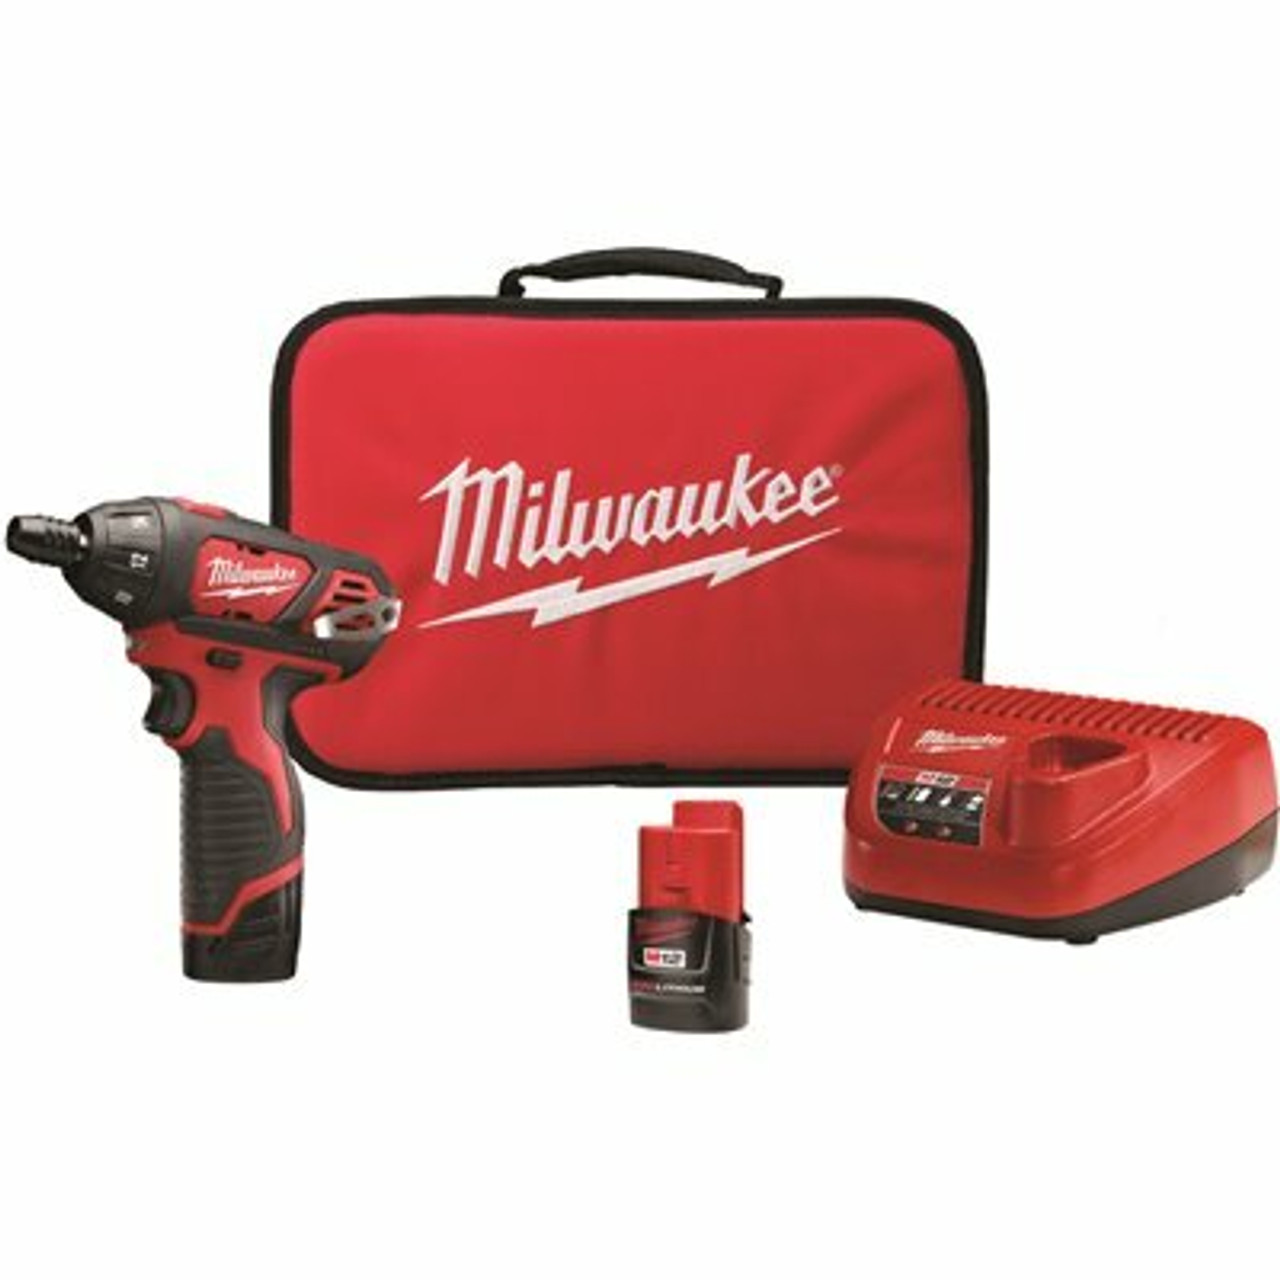 Milwaukee M12 12-Volt Lithium-Ion Cordless 1/4 In. Hex Screwdriver Kit With Two 1.5Ah Batteries, Charger And Tool Bag